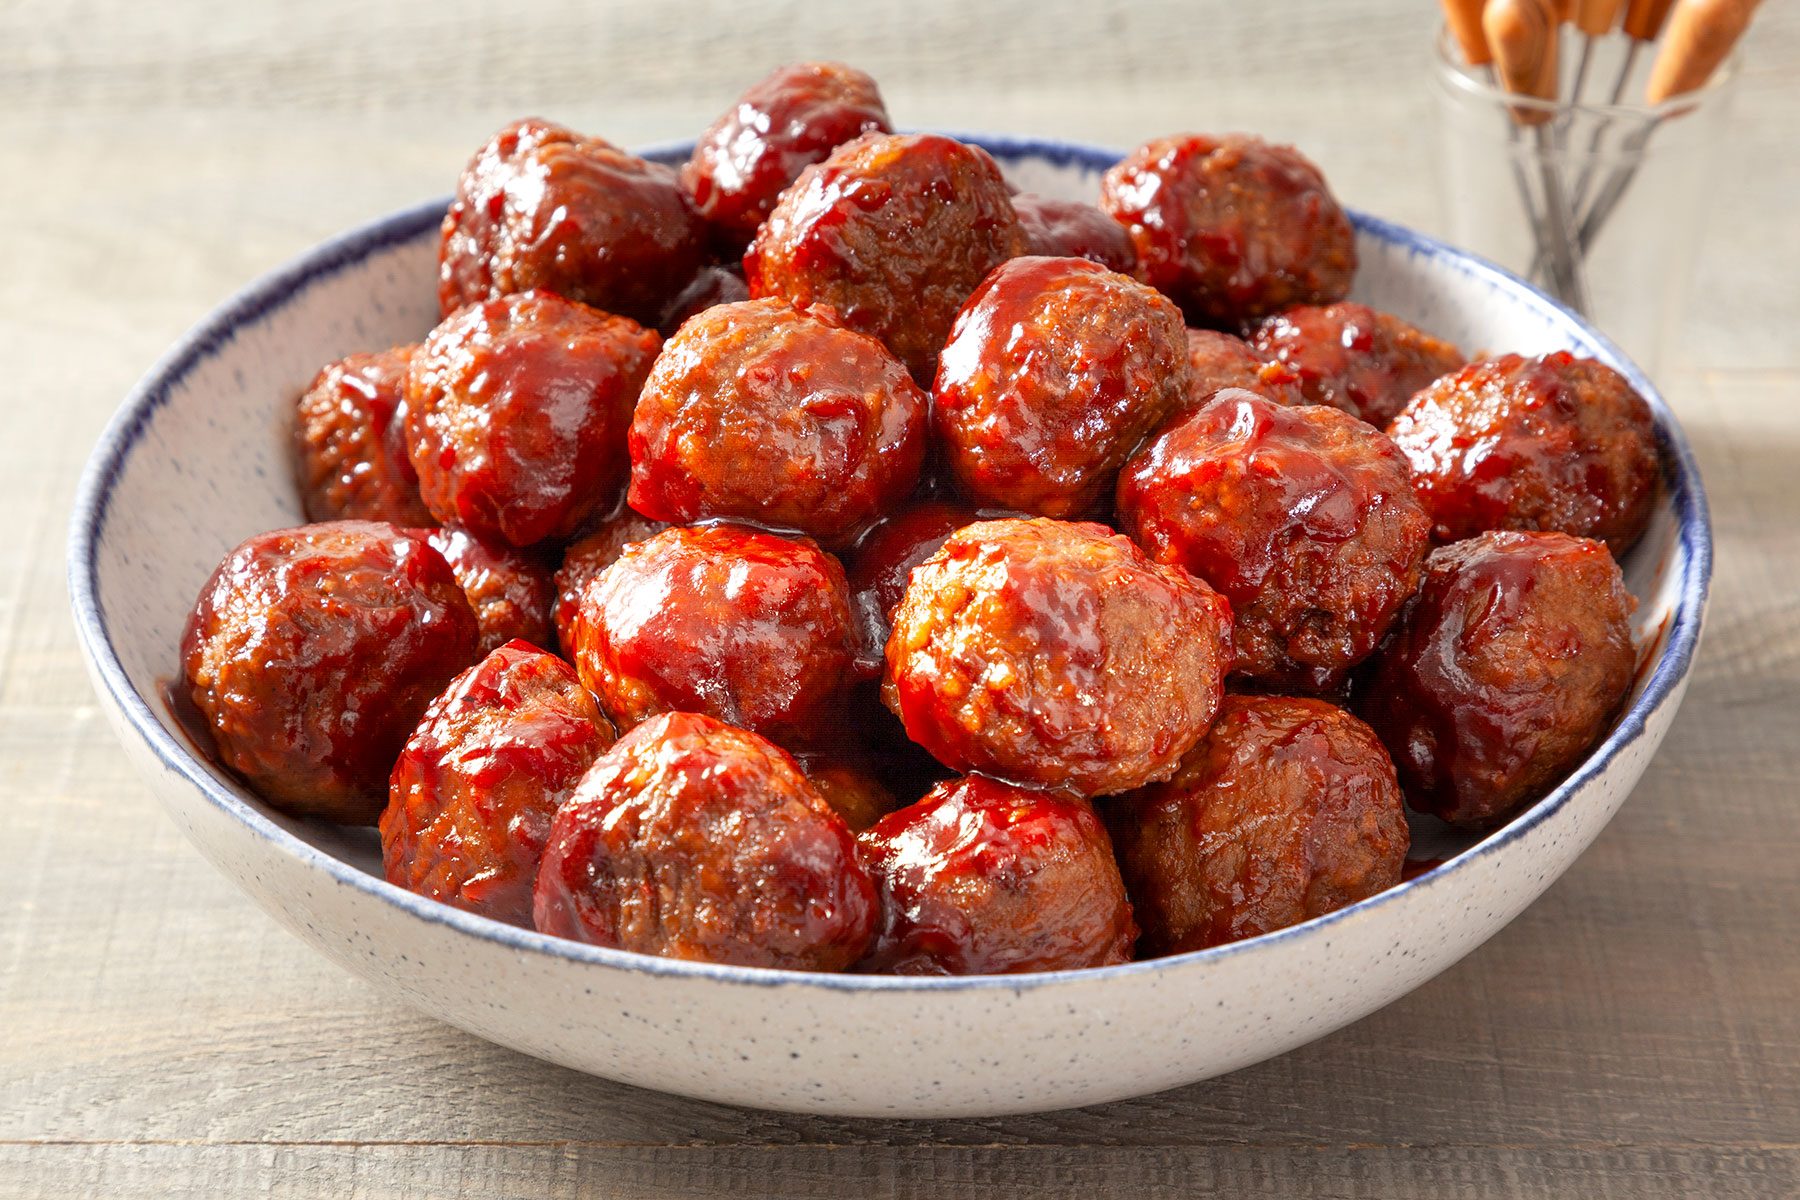 Chili And Jelly Meatballs served in large white bowl